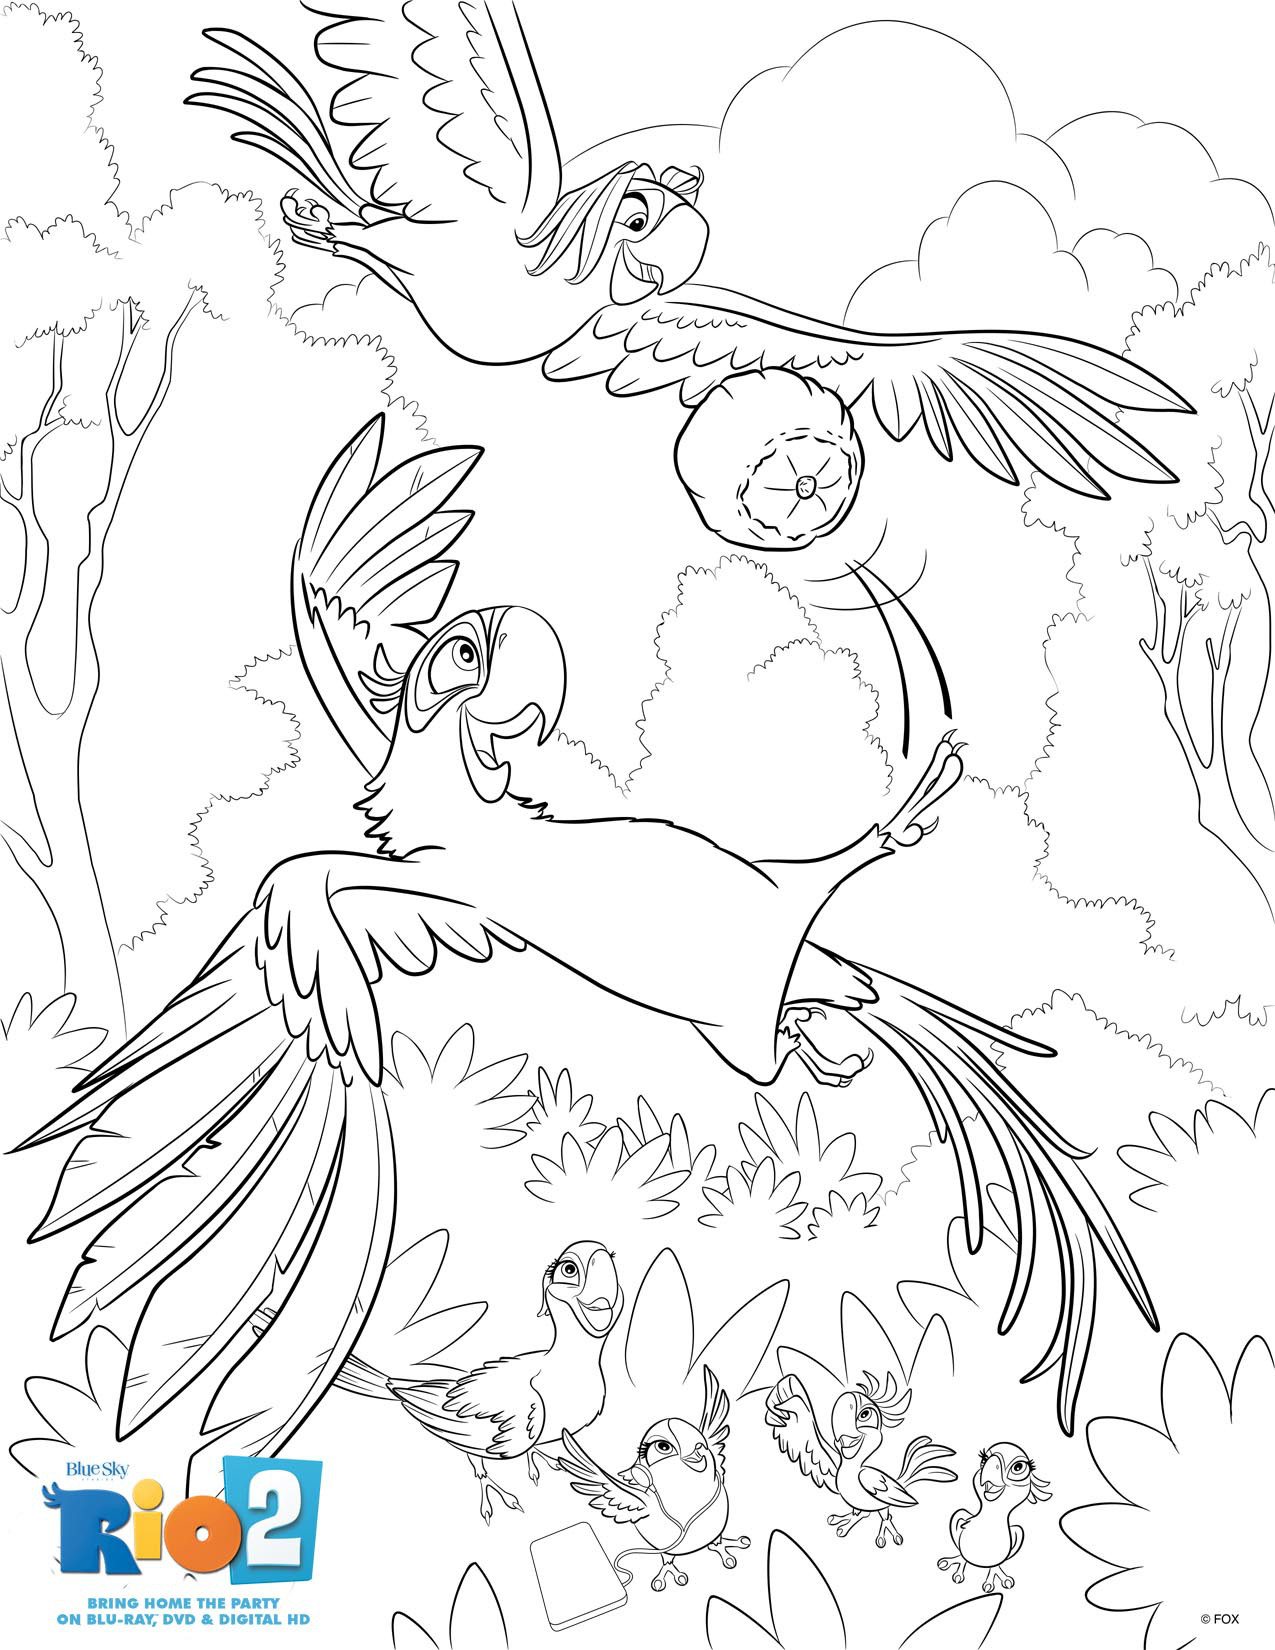 Rio 2 Coloring pages to download (part 2)